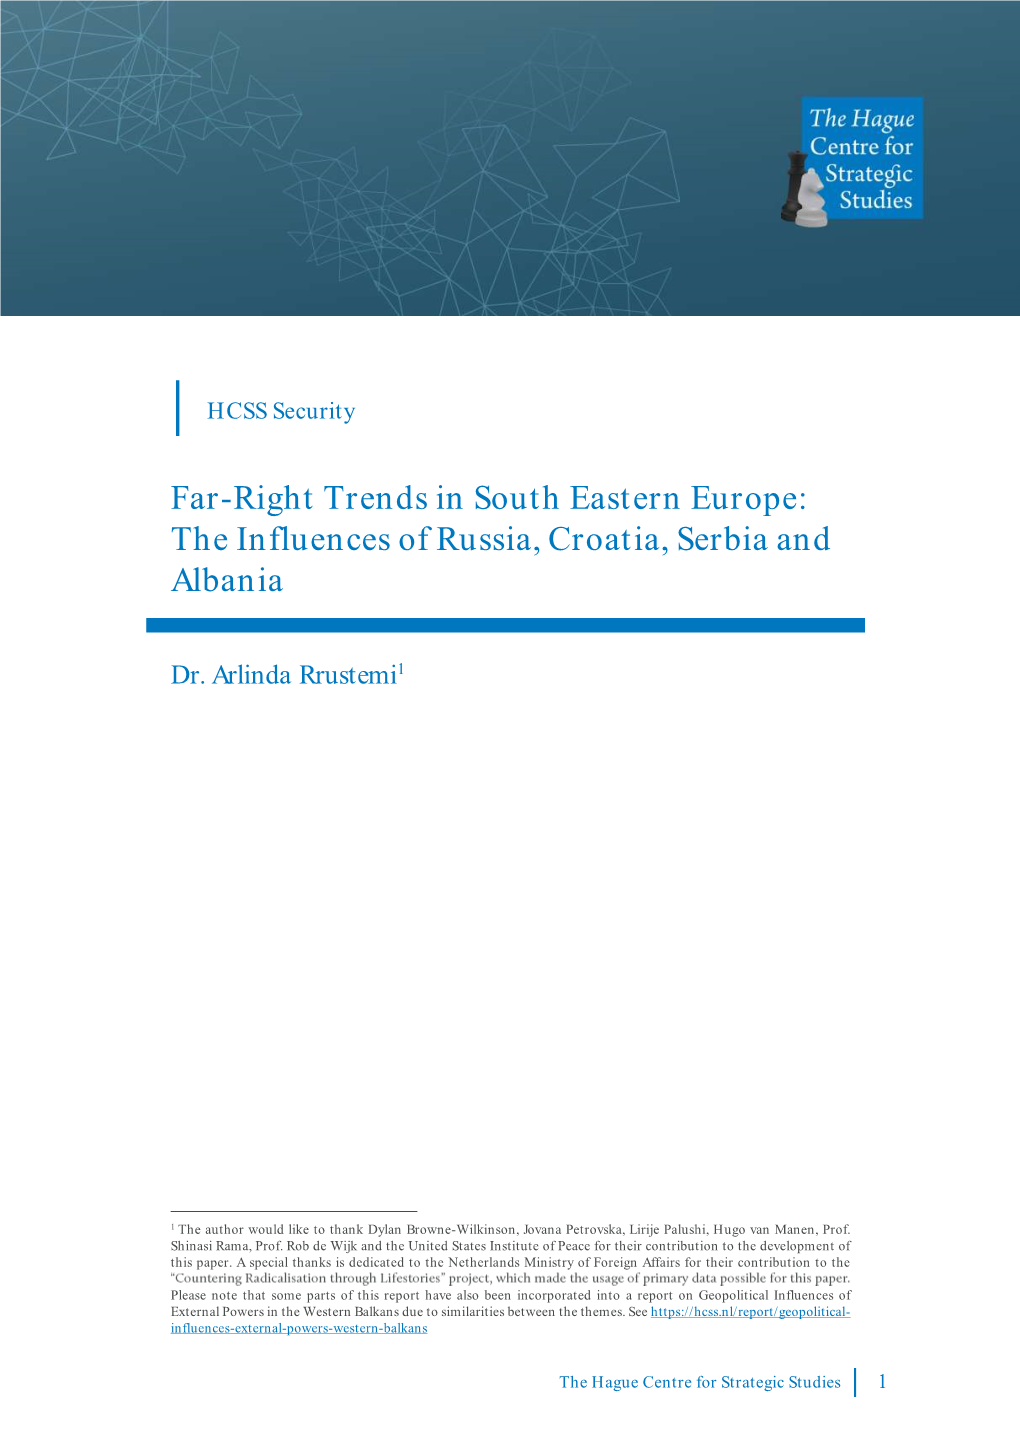 Far-Right Trends in South Eastern Europe: the Influences of Russia, Croatia, Serbia and Albania